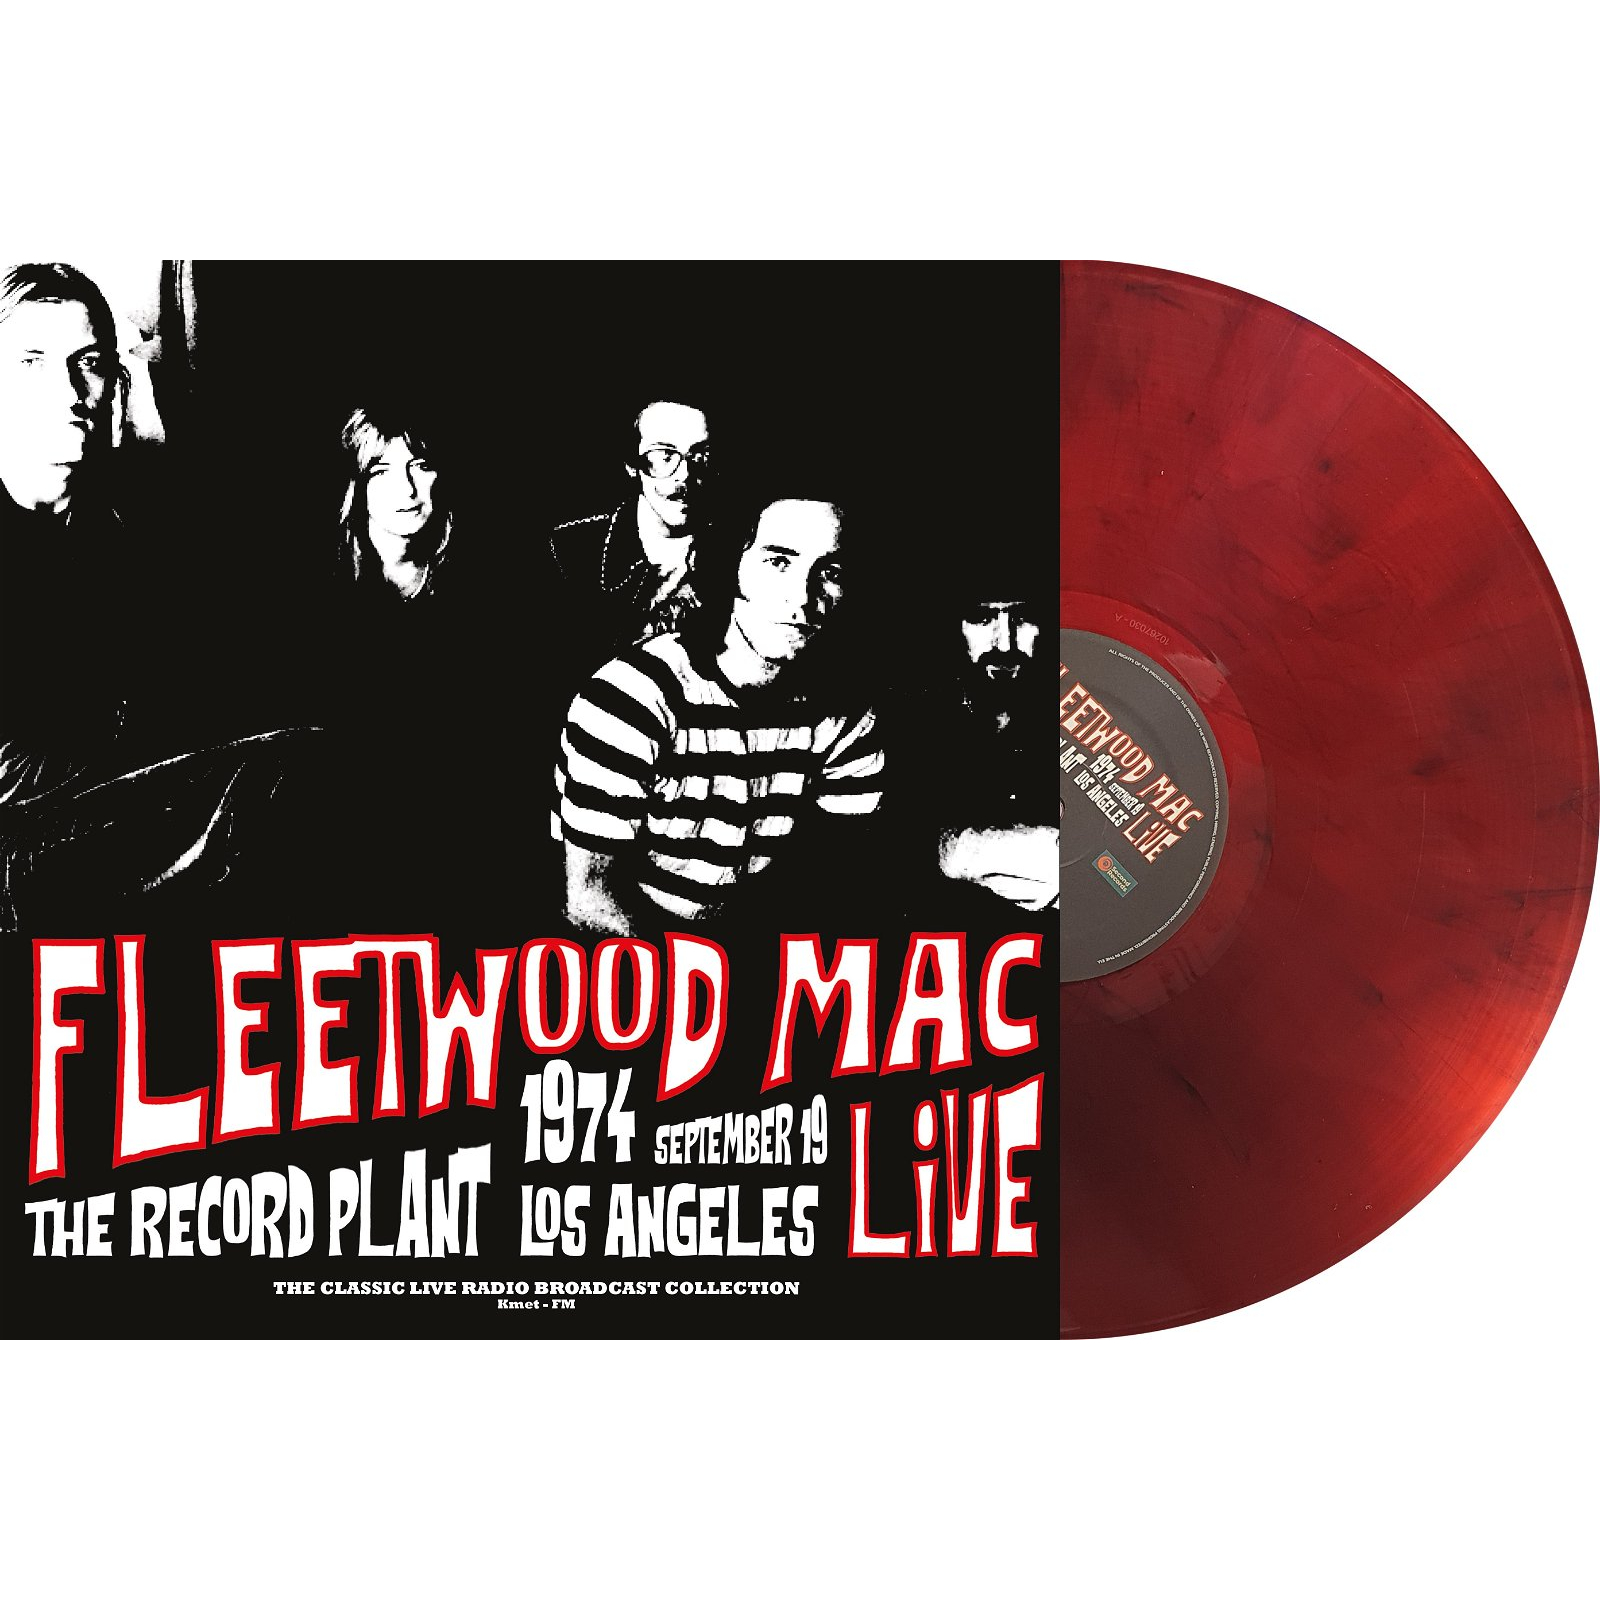 LIVE AT THE RECORD PLANT IN LOS ANGELES 19TH SEPTEMBER 1974 (MARBLE VINYL)